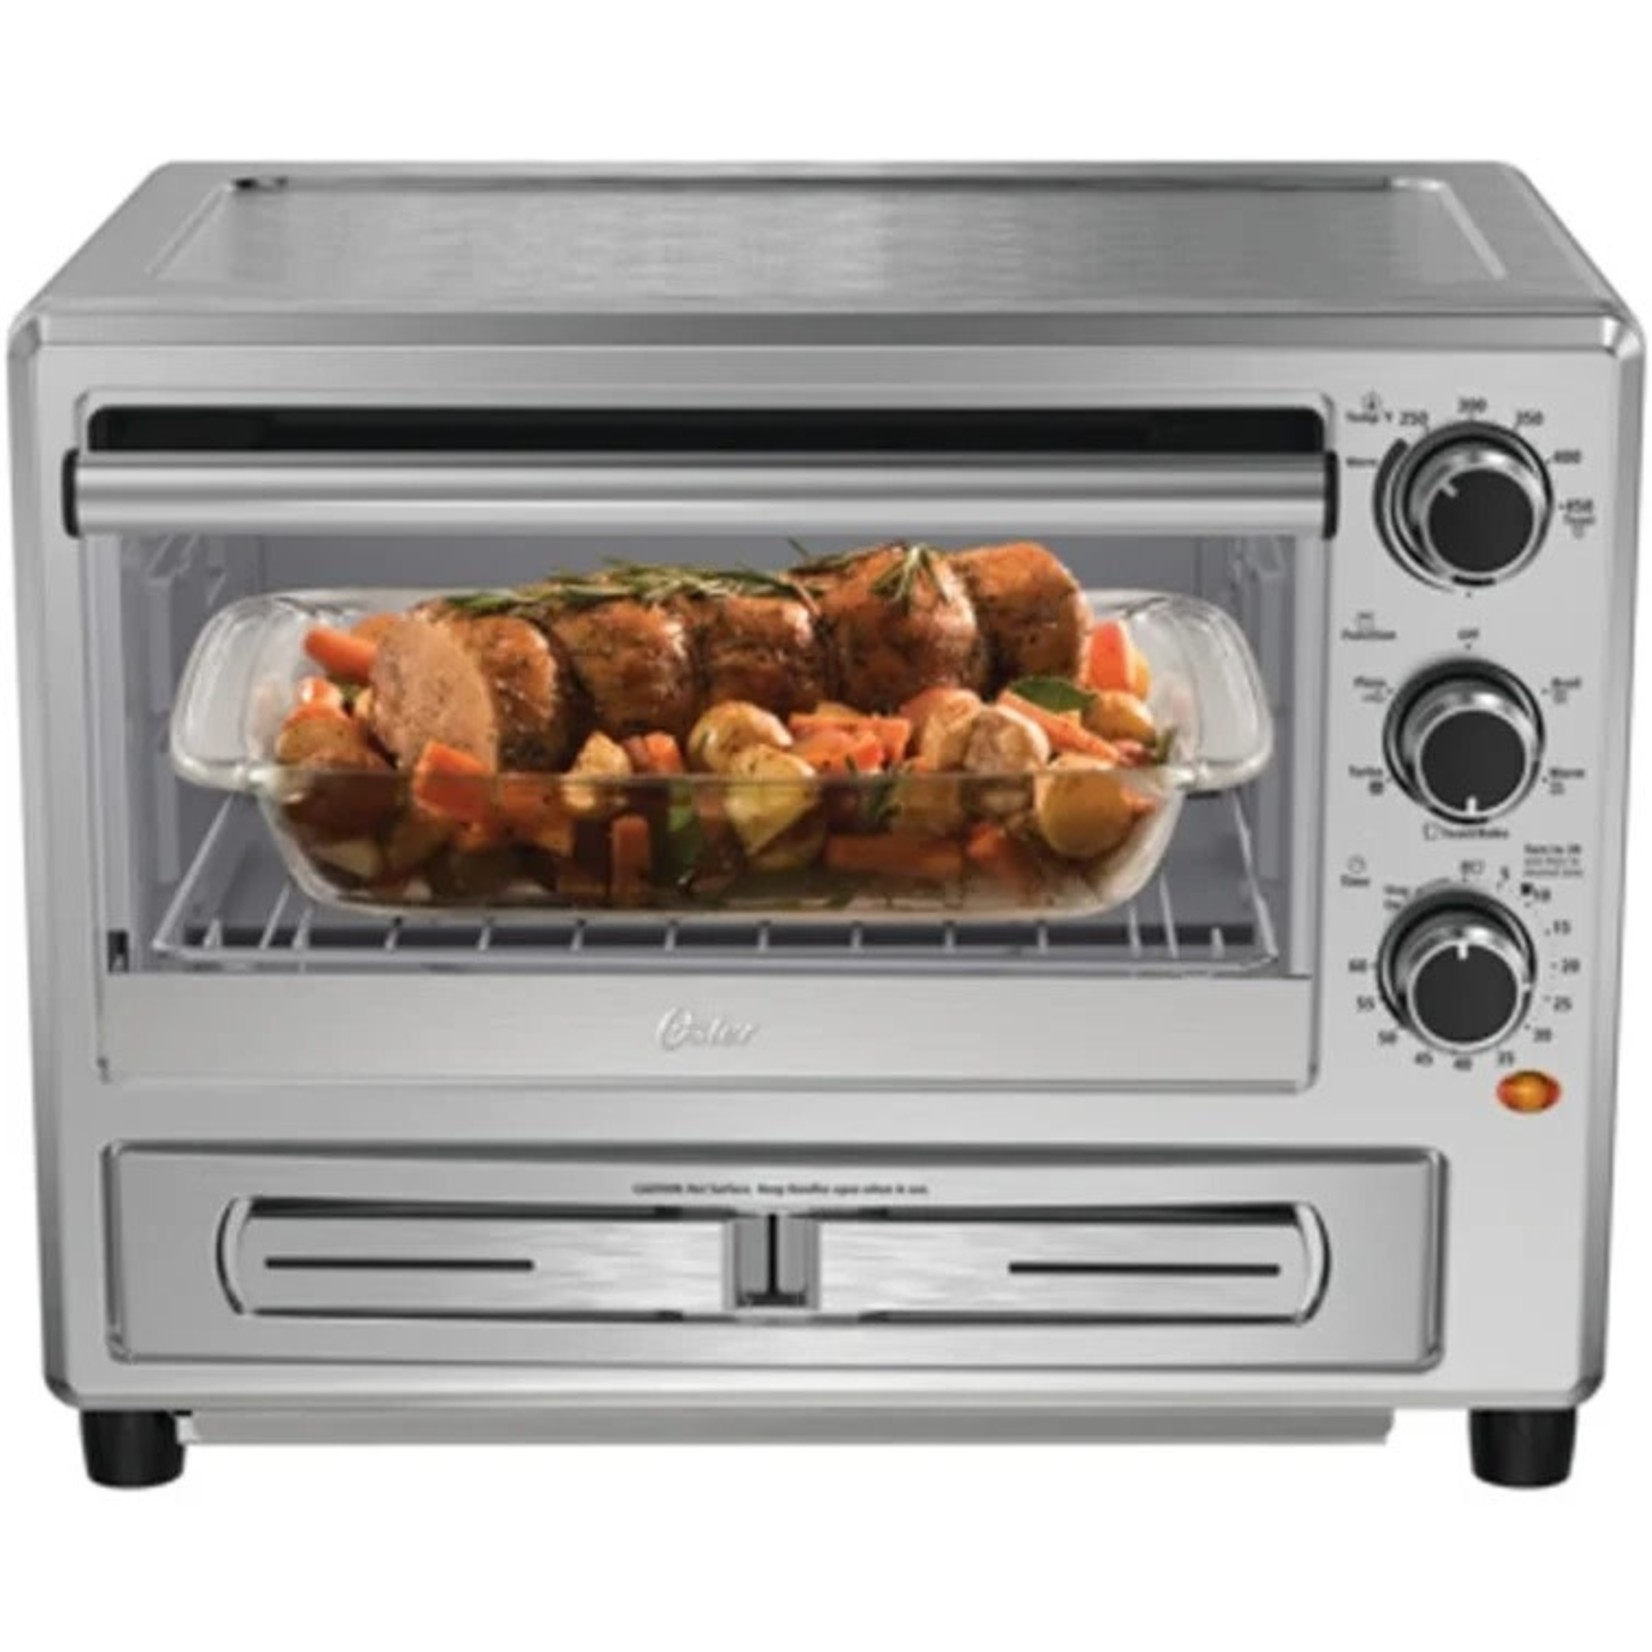 *Oster TSSTTVPZDS Turbo Convection Toaster Oven W/ Pizza Drawer - Stainless Steel